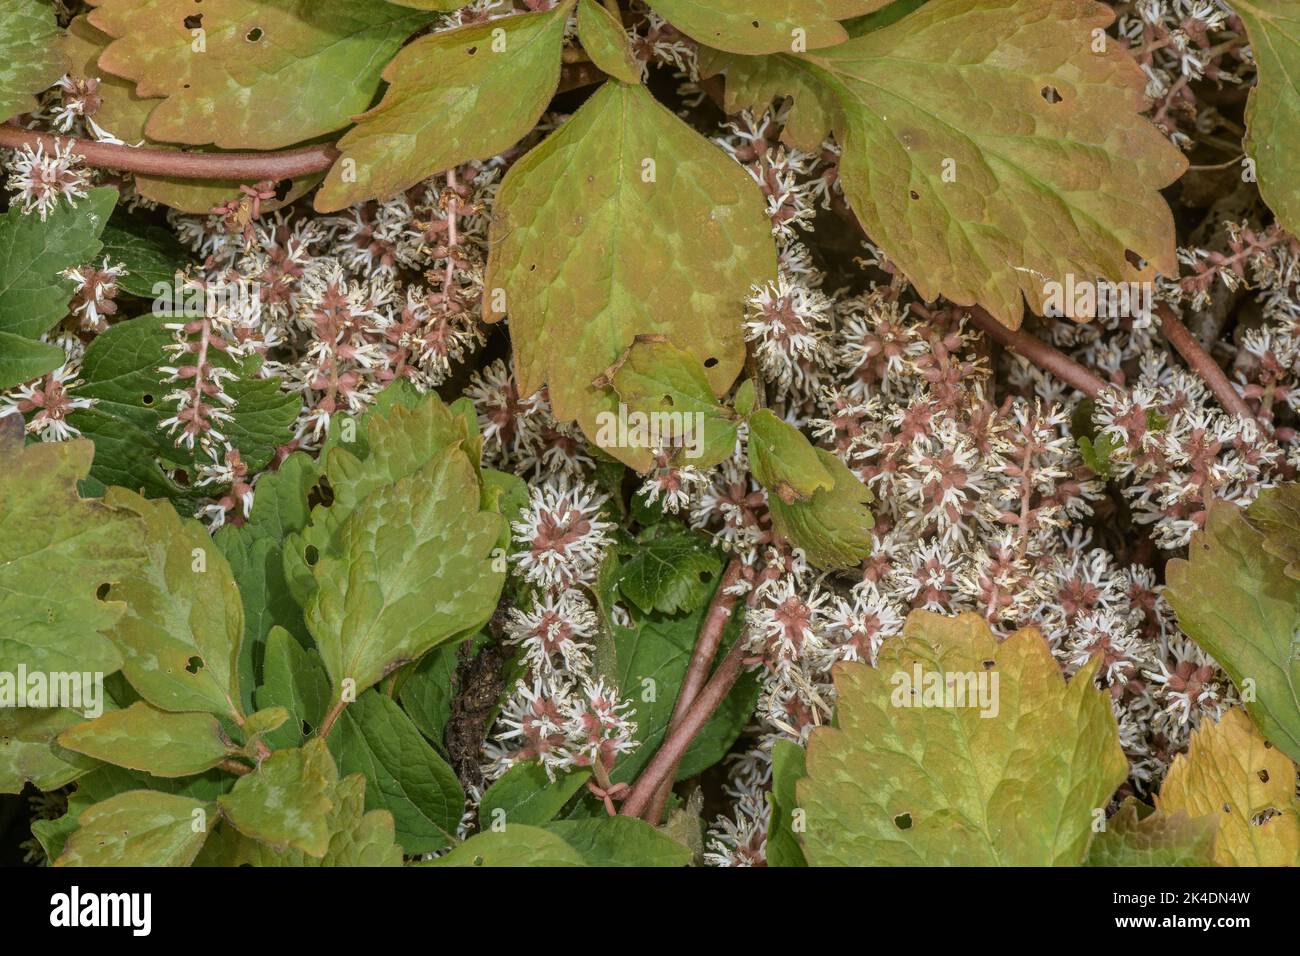 Allegheny Mountain Spurge, Pachysandra procumbens in flower in SE USA. Stock Photo